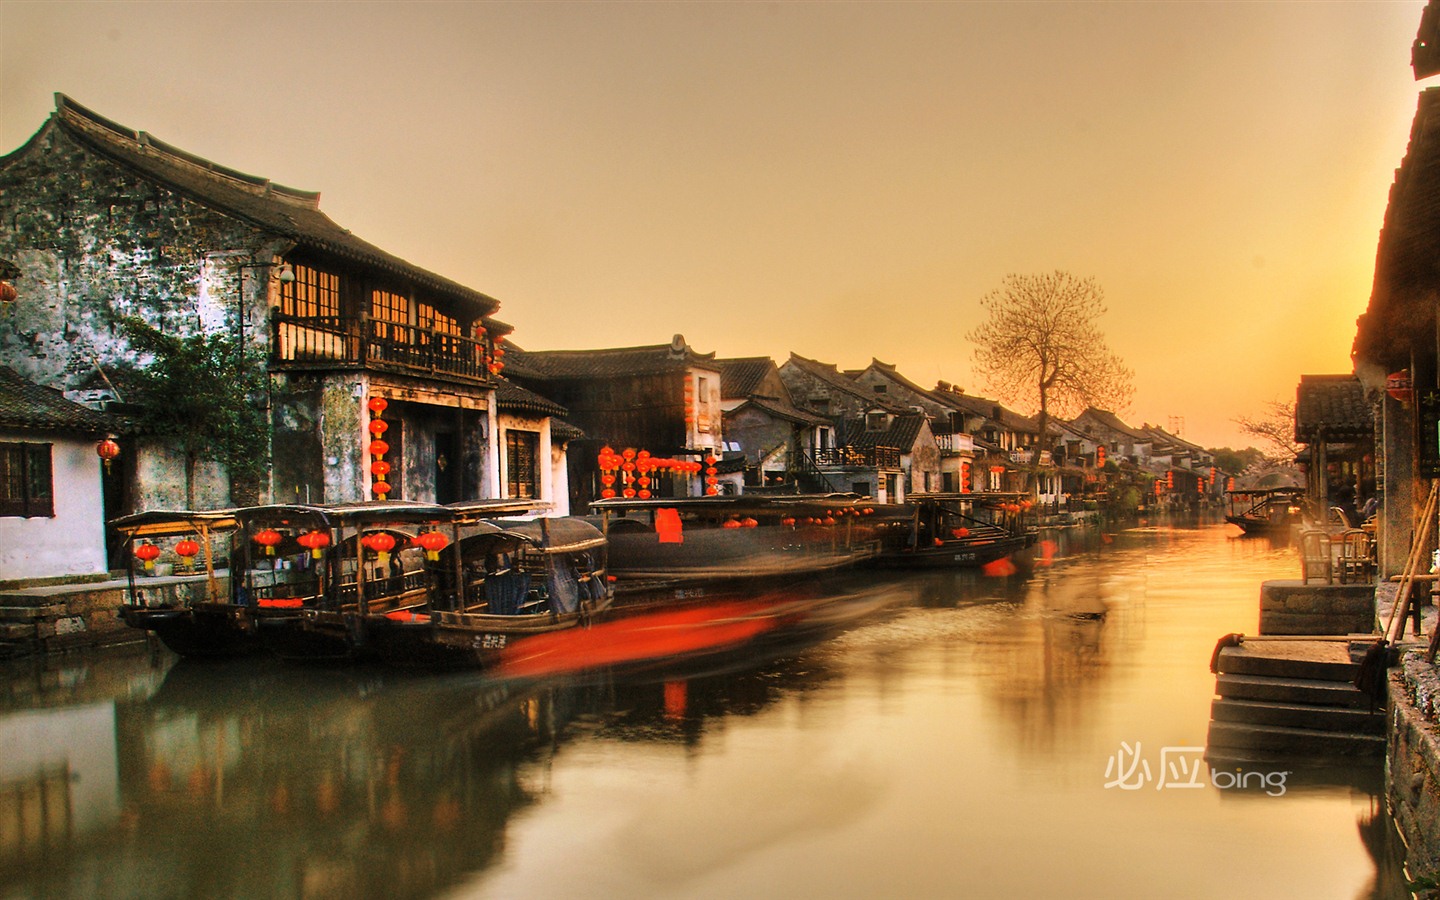 Best of Bing Wallpapers: China #4 - 1440x900